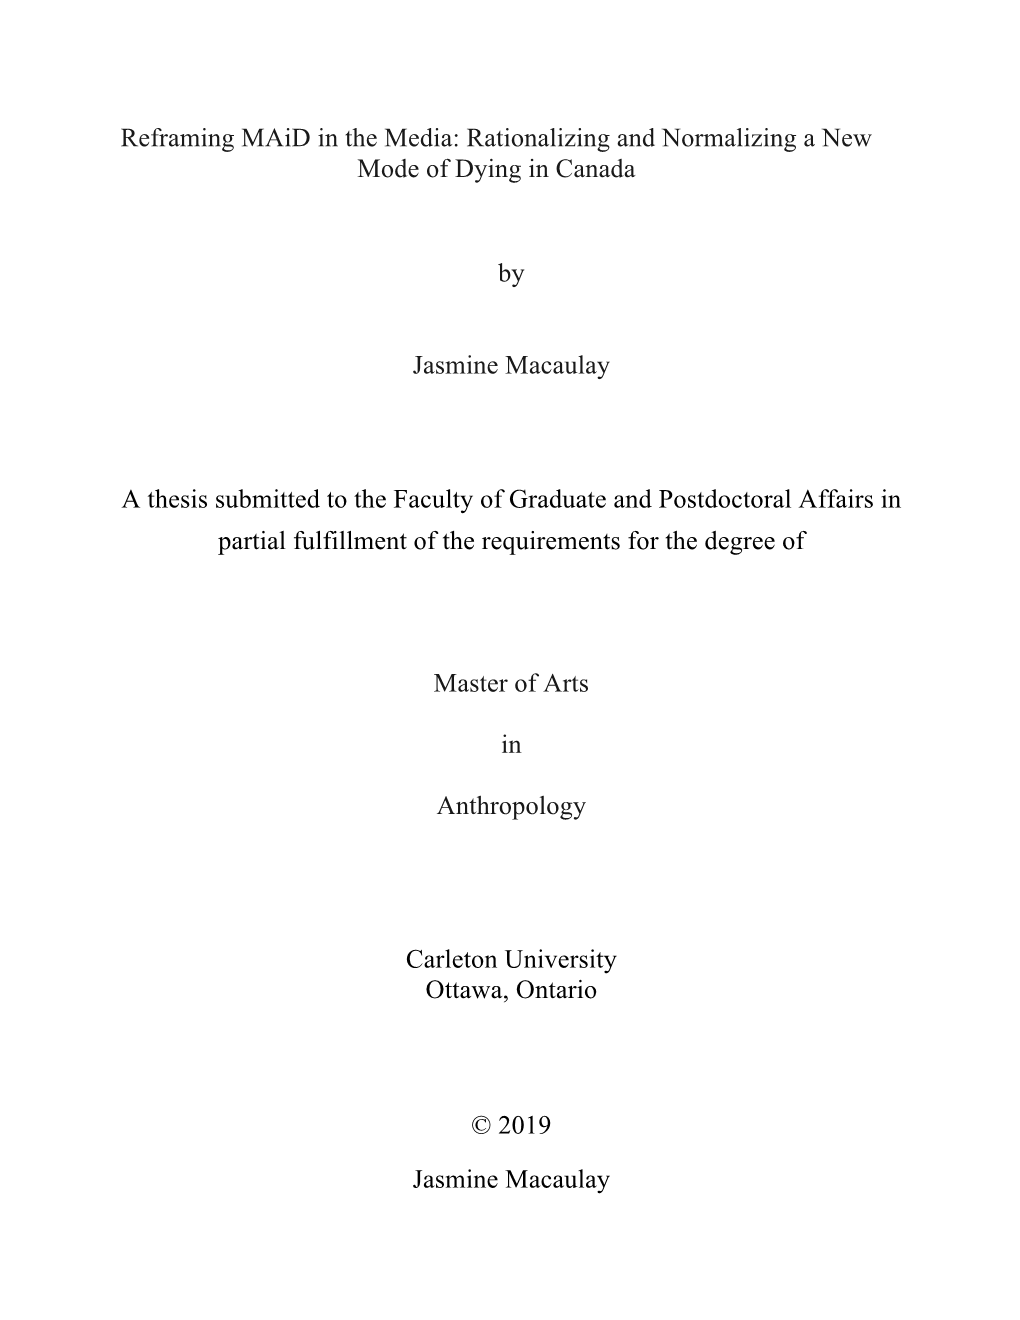 Thesis Submitted to the Faculty of Graduate and Postdoctoral Affairs in Partial Fulfillment of the Requirements for the Degree Of